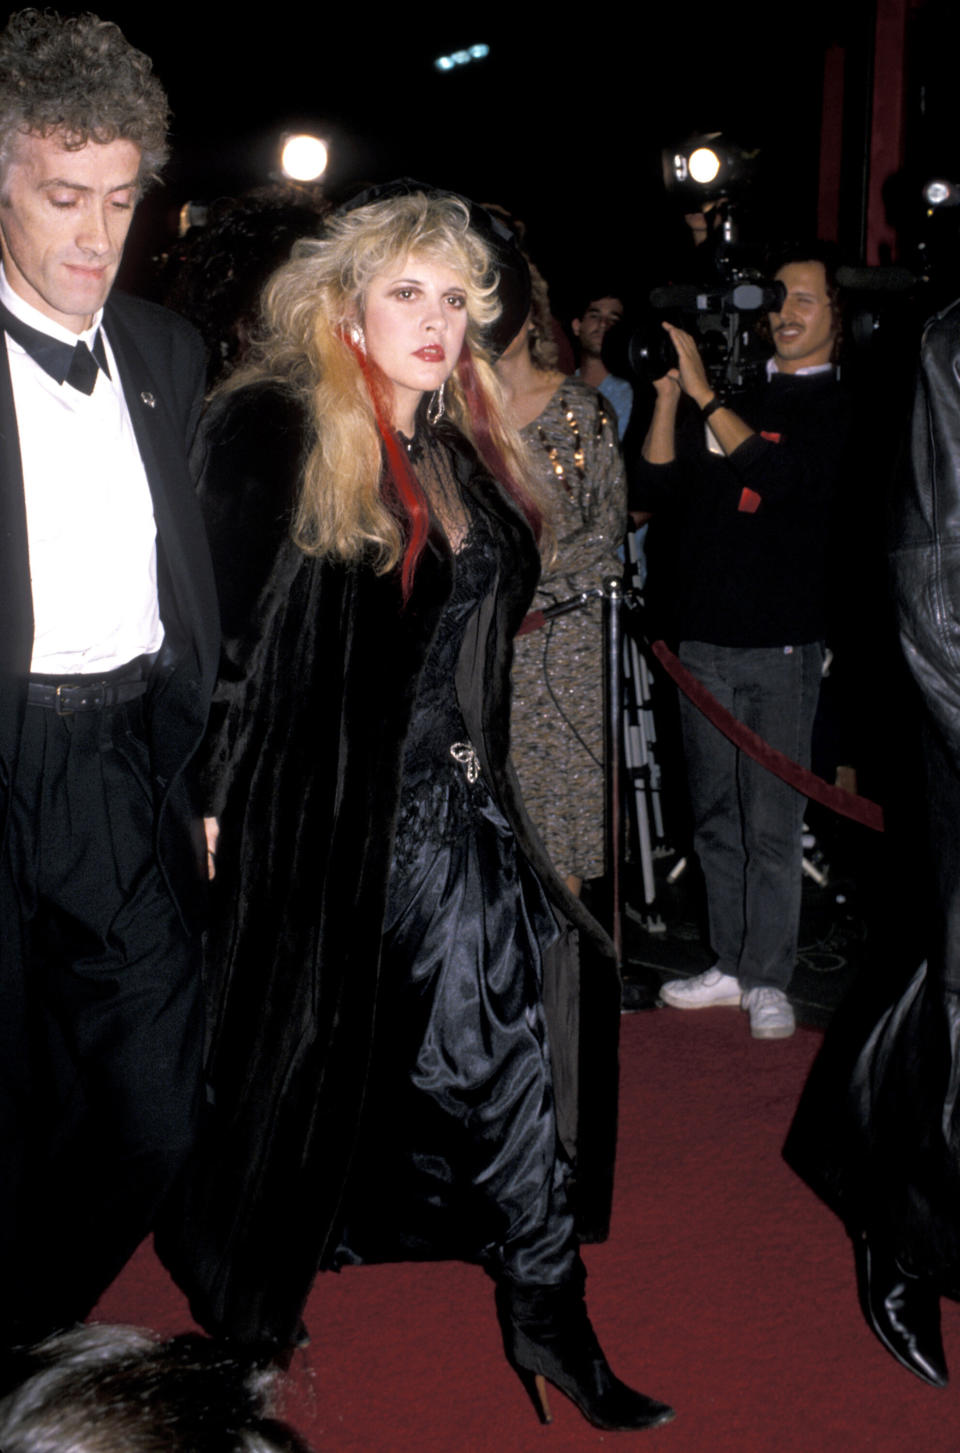 Nicks at the Los Angeles premiere of "U2: Rattle and Hum" at Mann's Chinese Theater in Hollywood in November 1988.